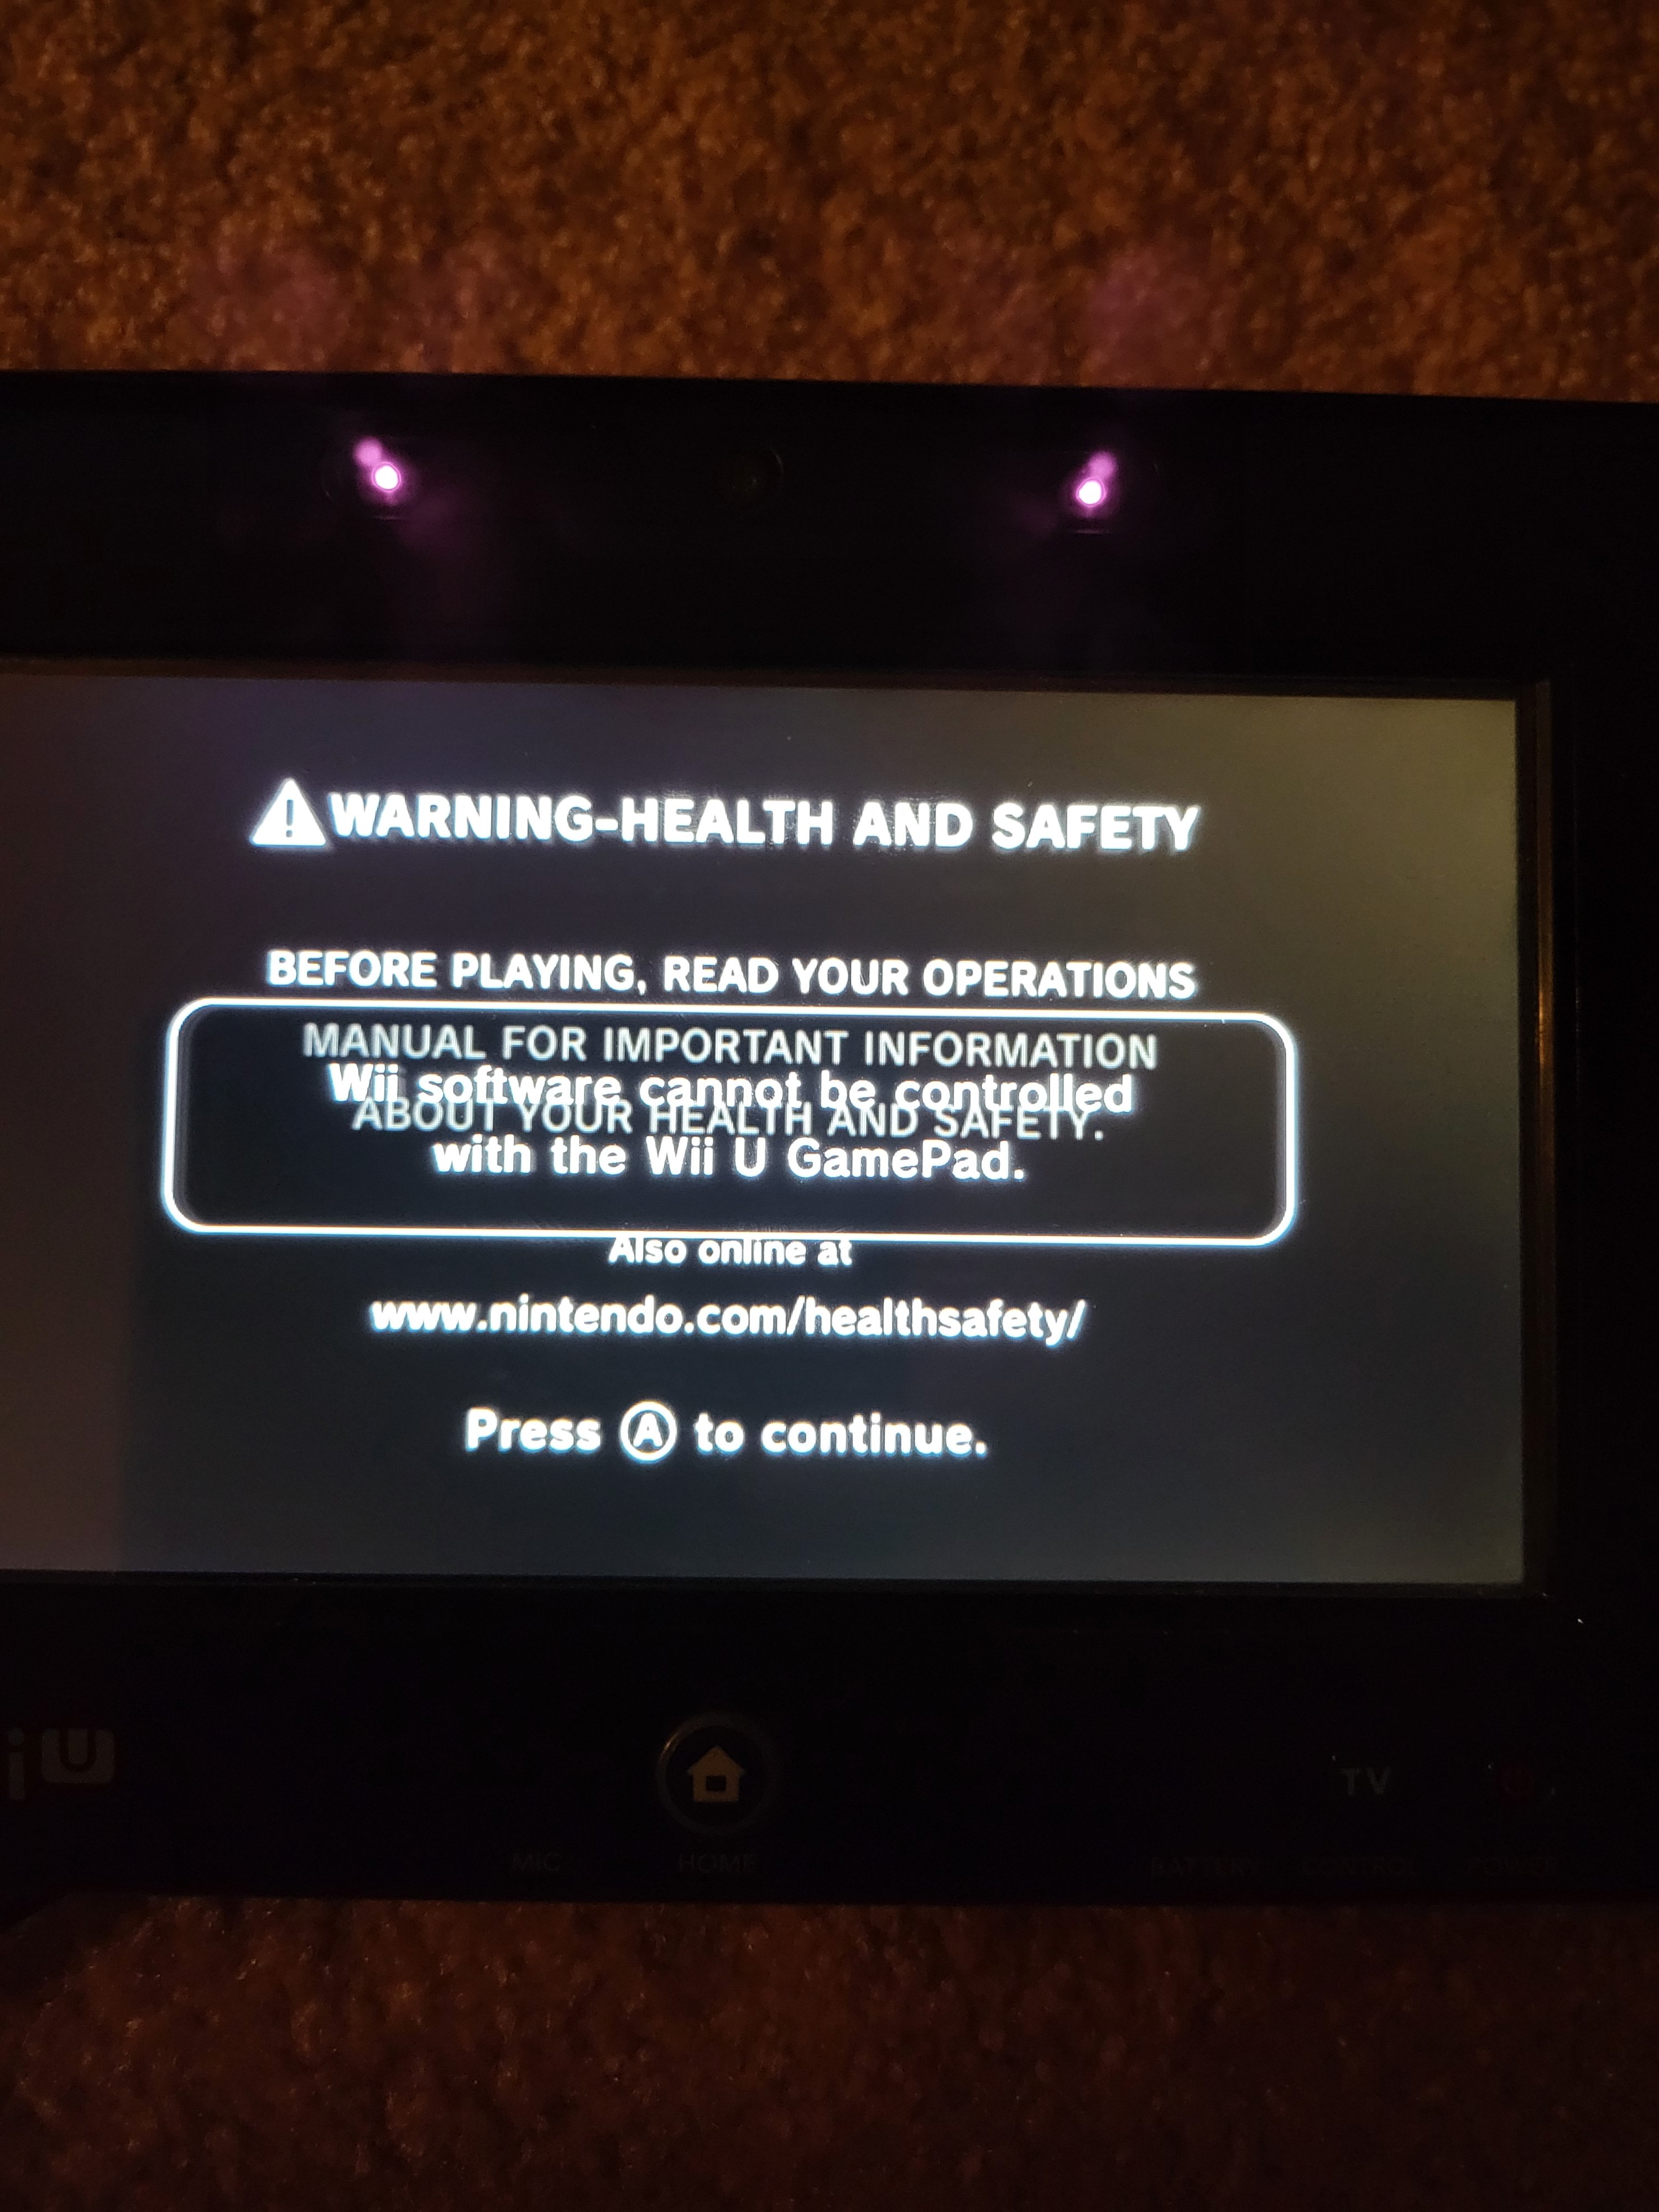 wuphax "wii software cannot be controlled with the wii u game pad" |  GBAtemp.net - The Independent Video Game Community